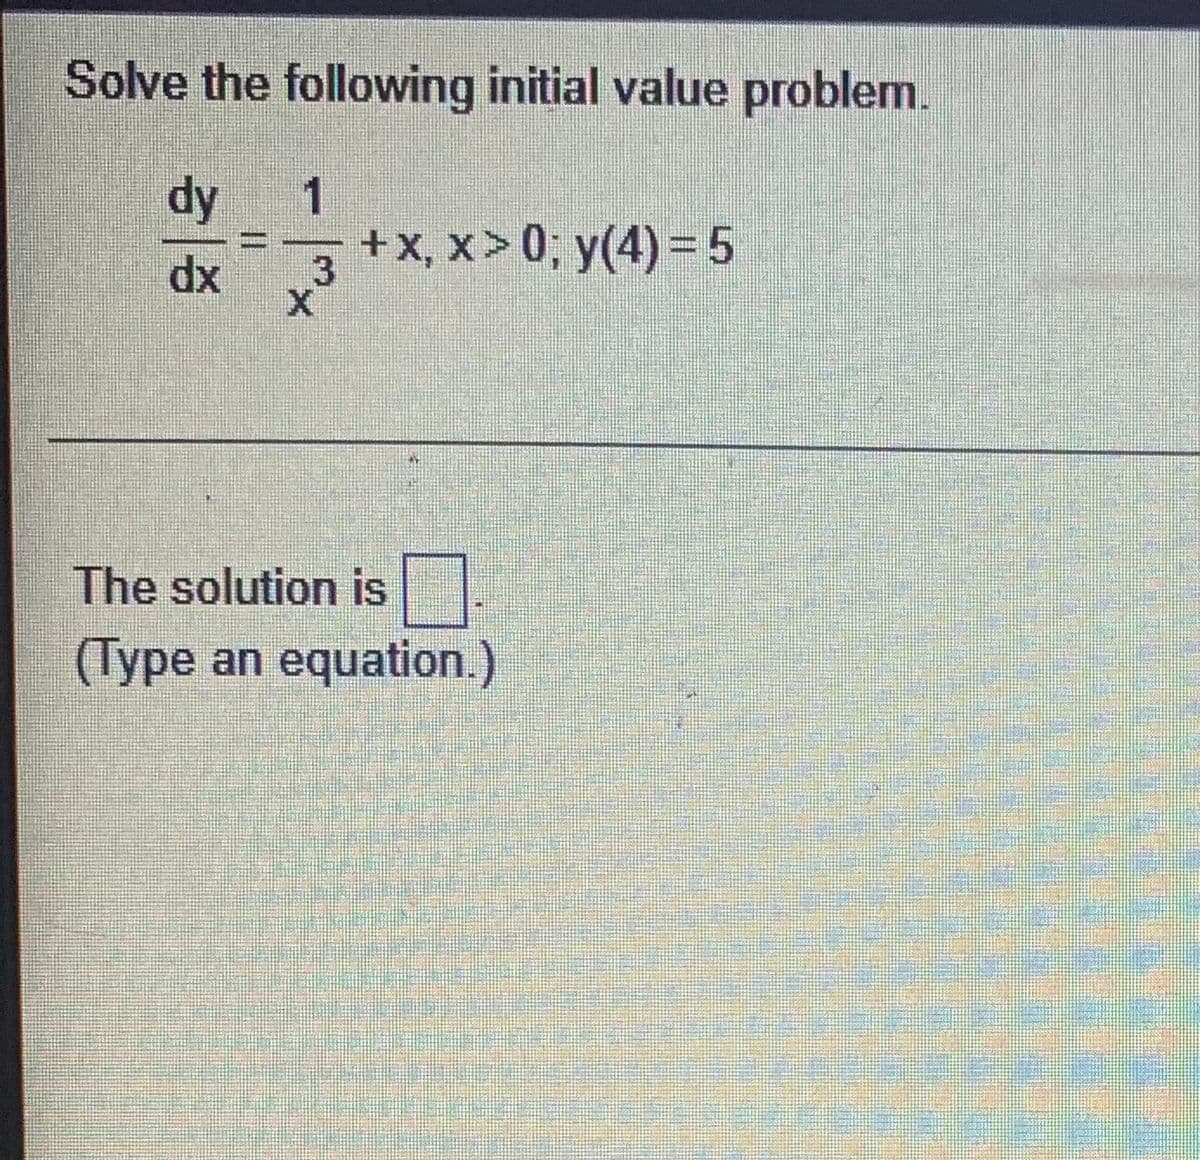 Solve the following initial value problem.
dy
TH
1
|×
+x, x>0; y(4) = 5
The solution is
(Type an equation.)